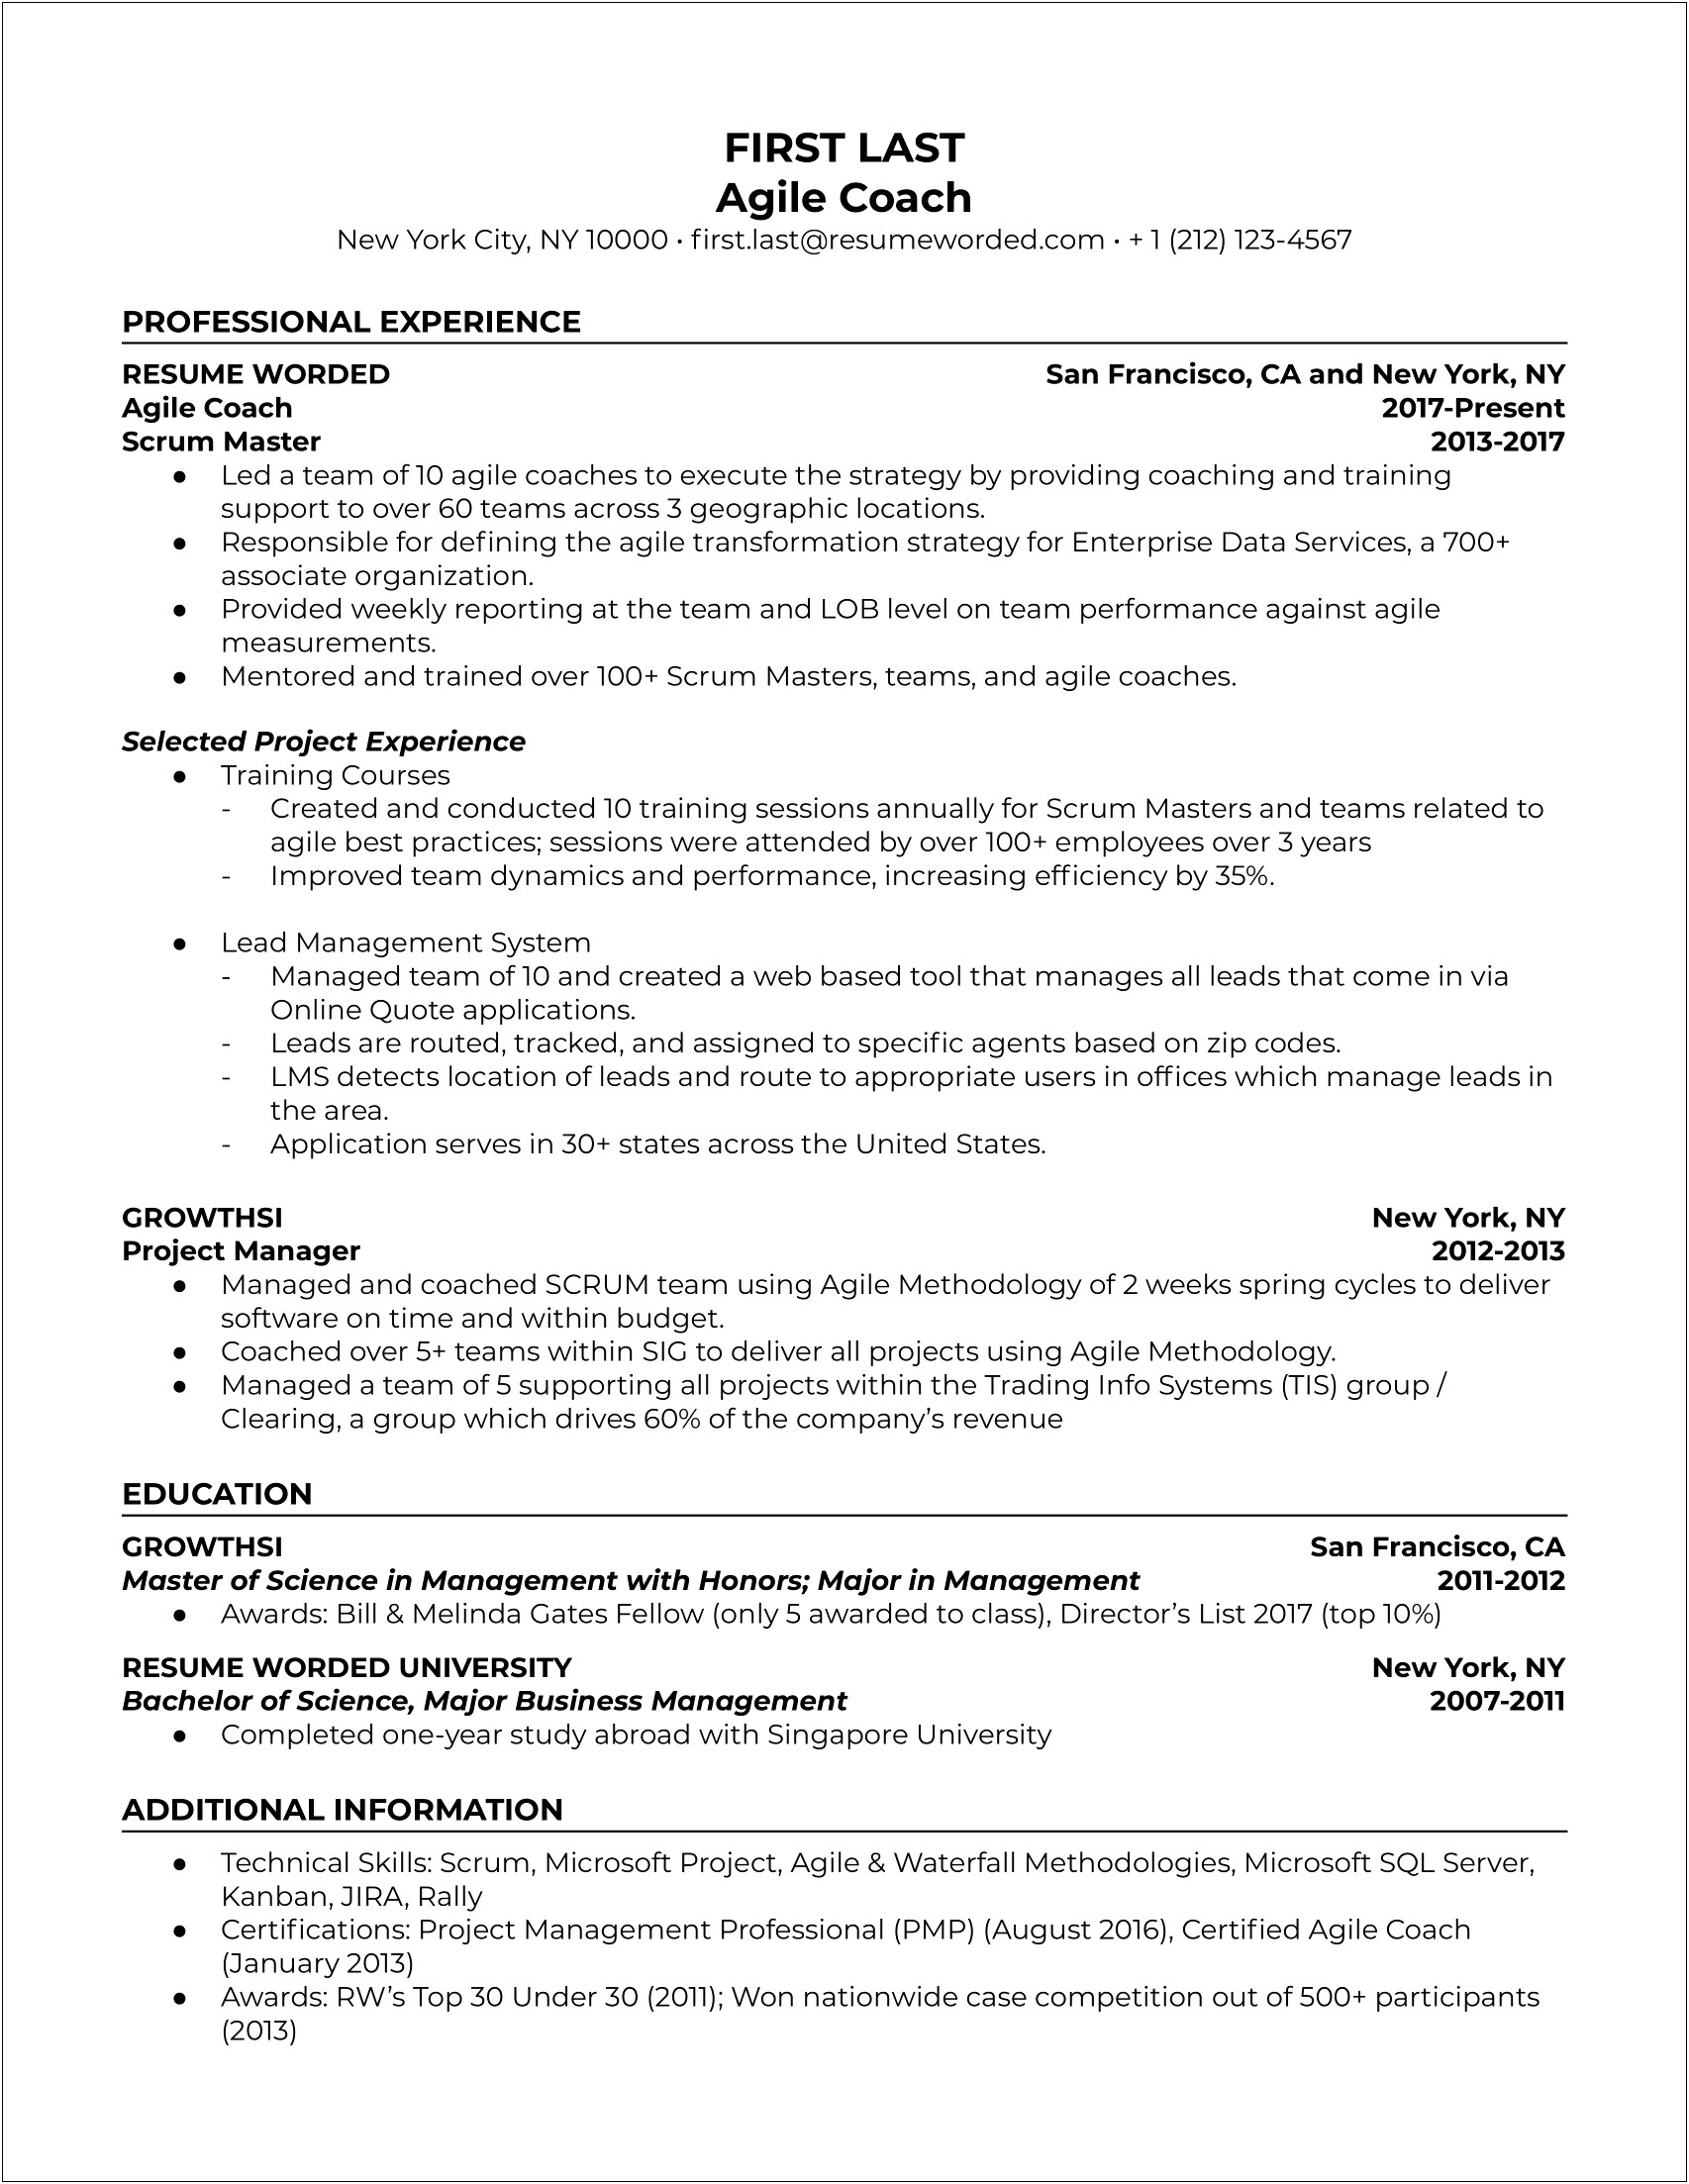 Resume School Only Attended One Year